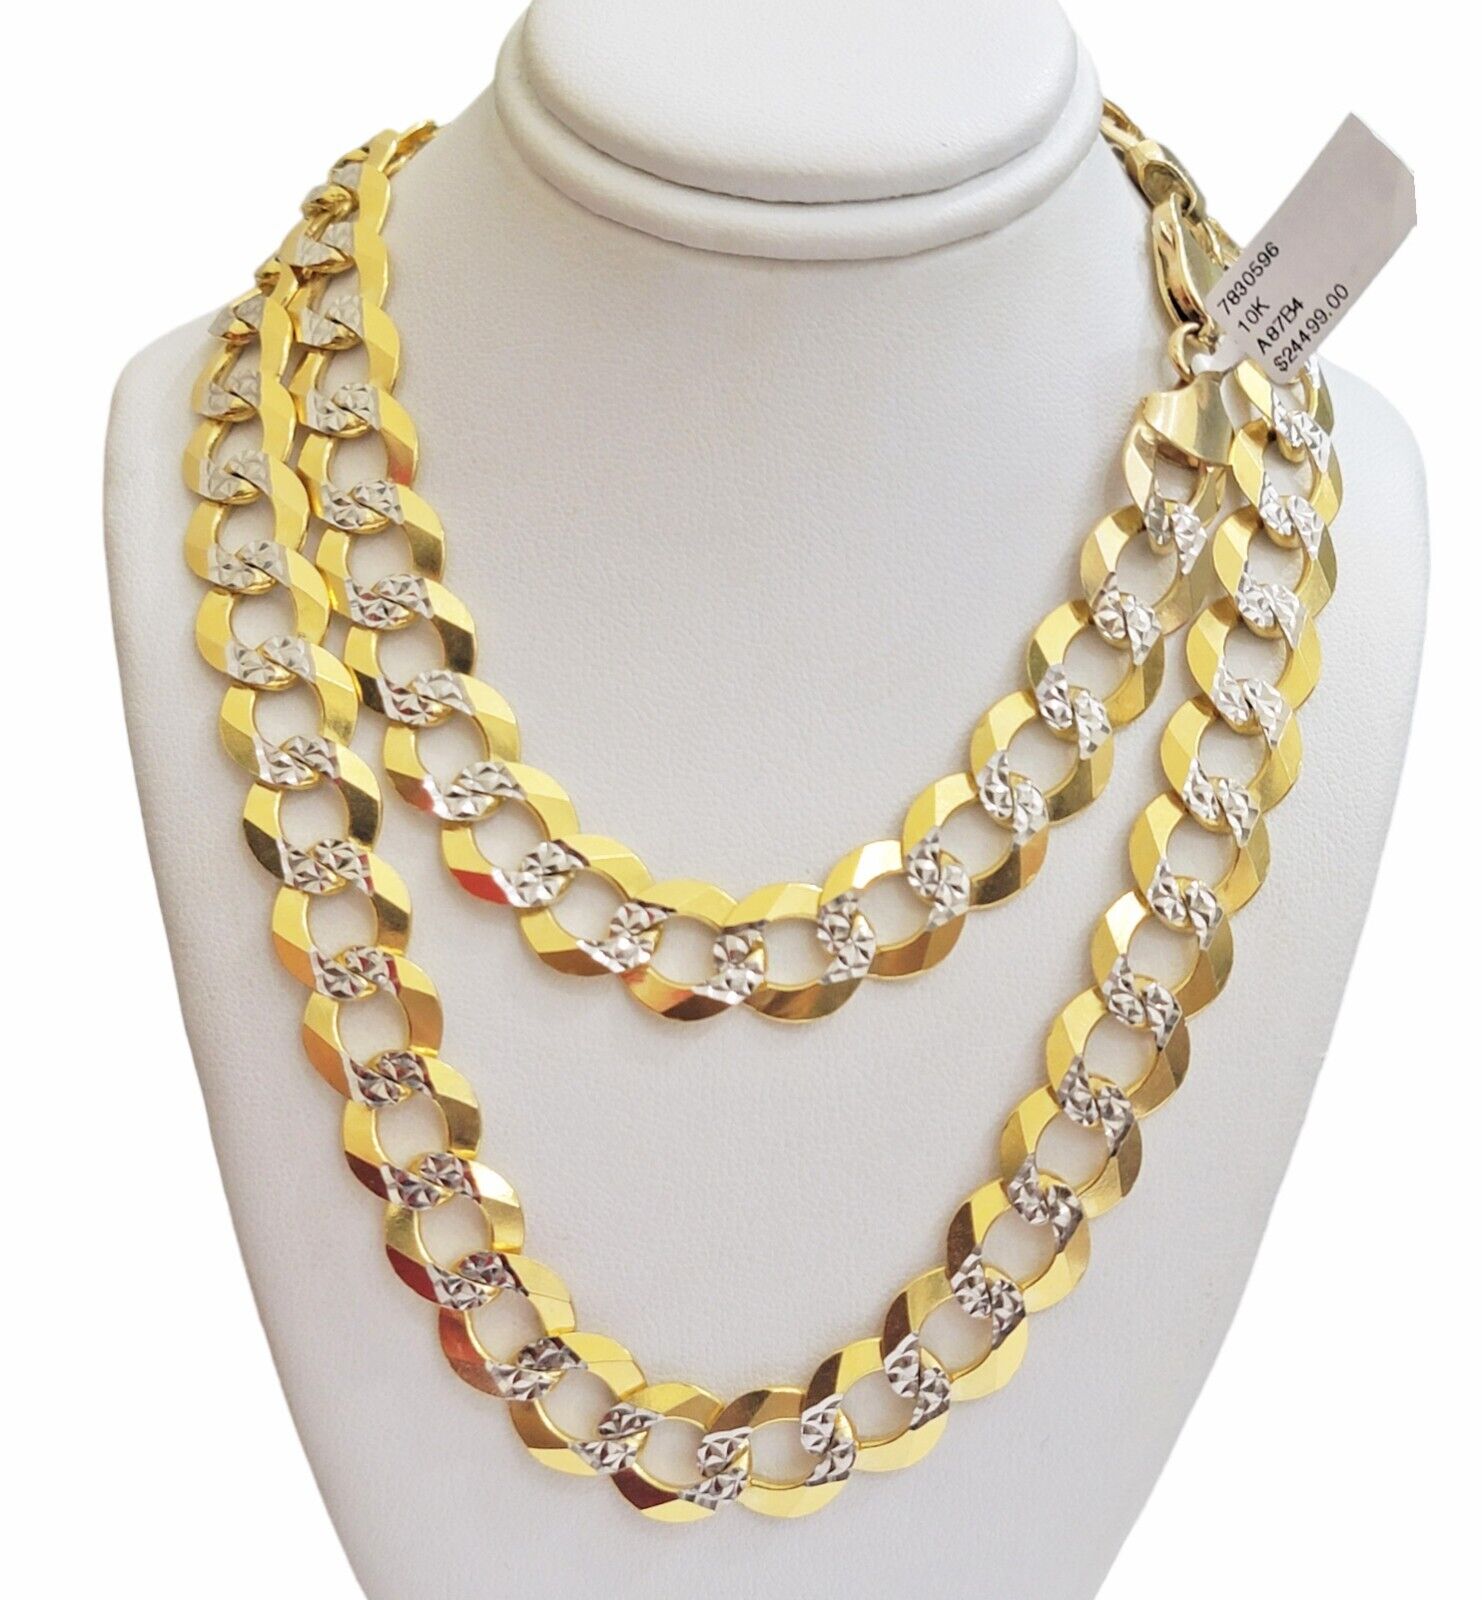 10k Yellow Gold Chain Necklace Cuban Curb Link 22" Diamond Cuts 12.5mm Solid Men